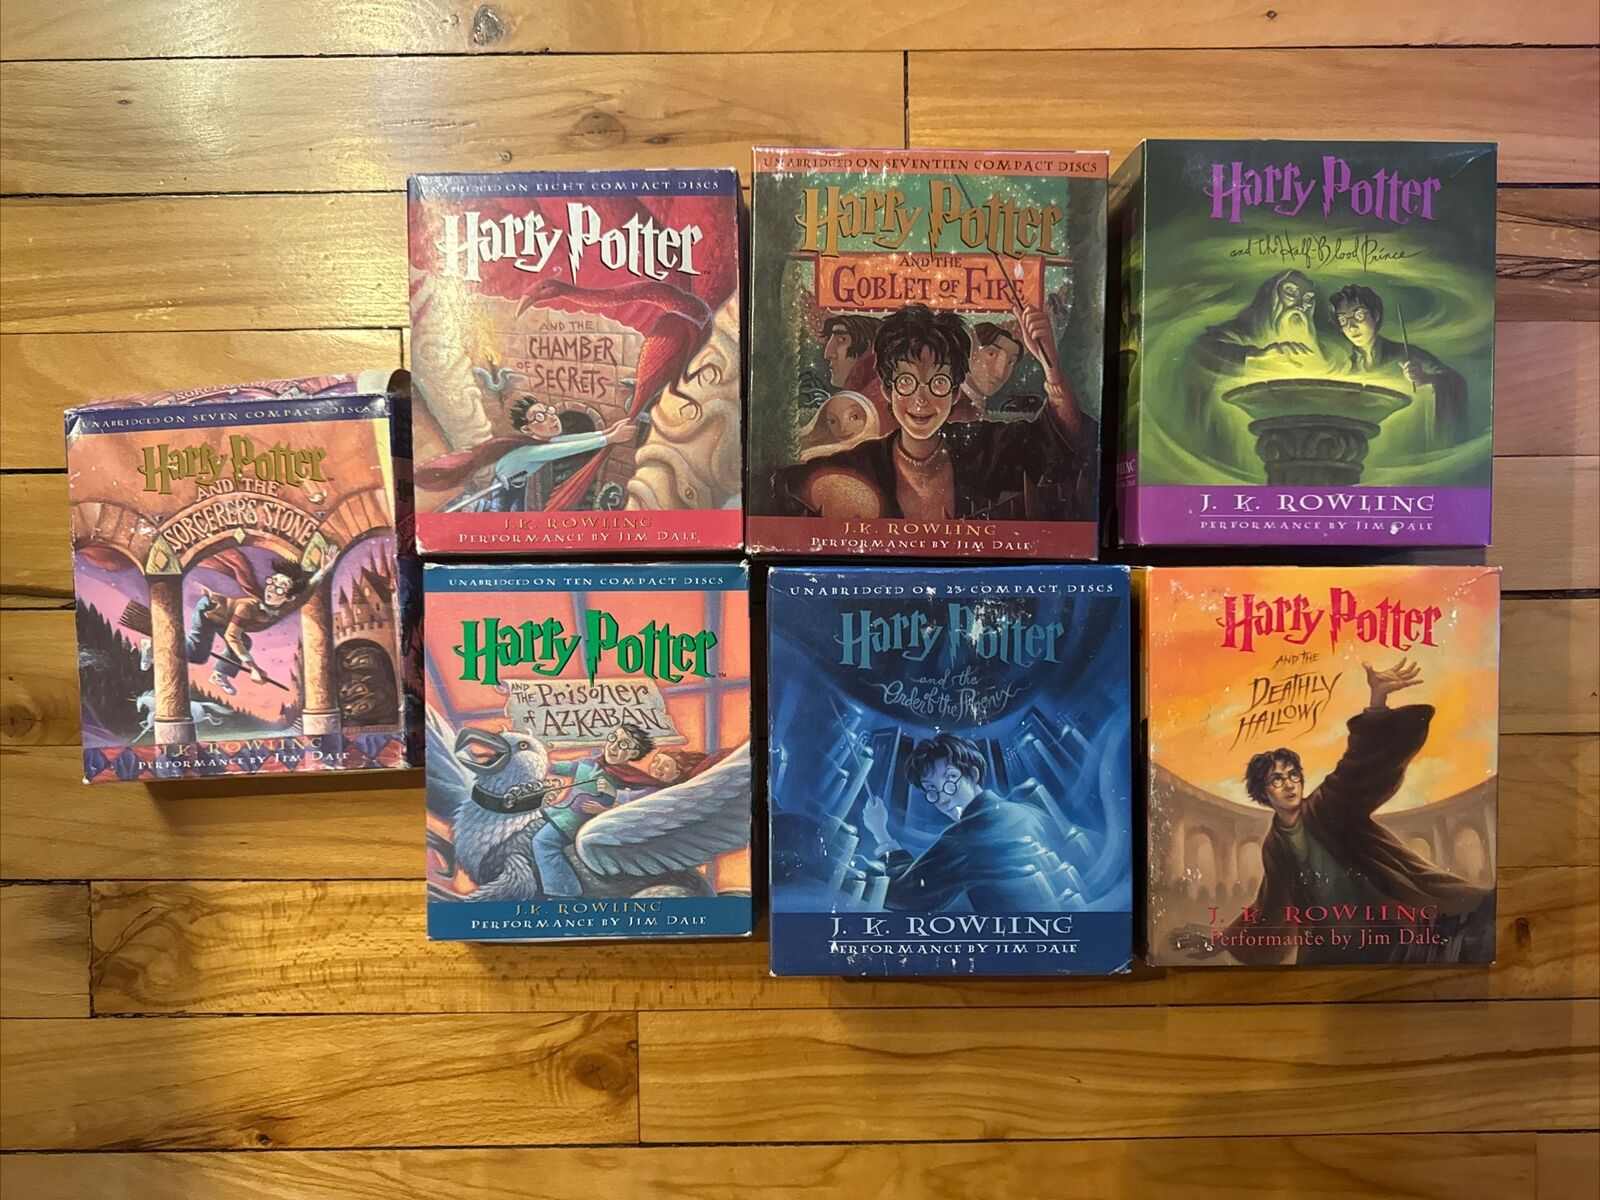 HARRY POTTER AUDIO BOOK CD SETS COMPLETE COLLECTION 1-7 J.K. ROWLING